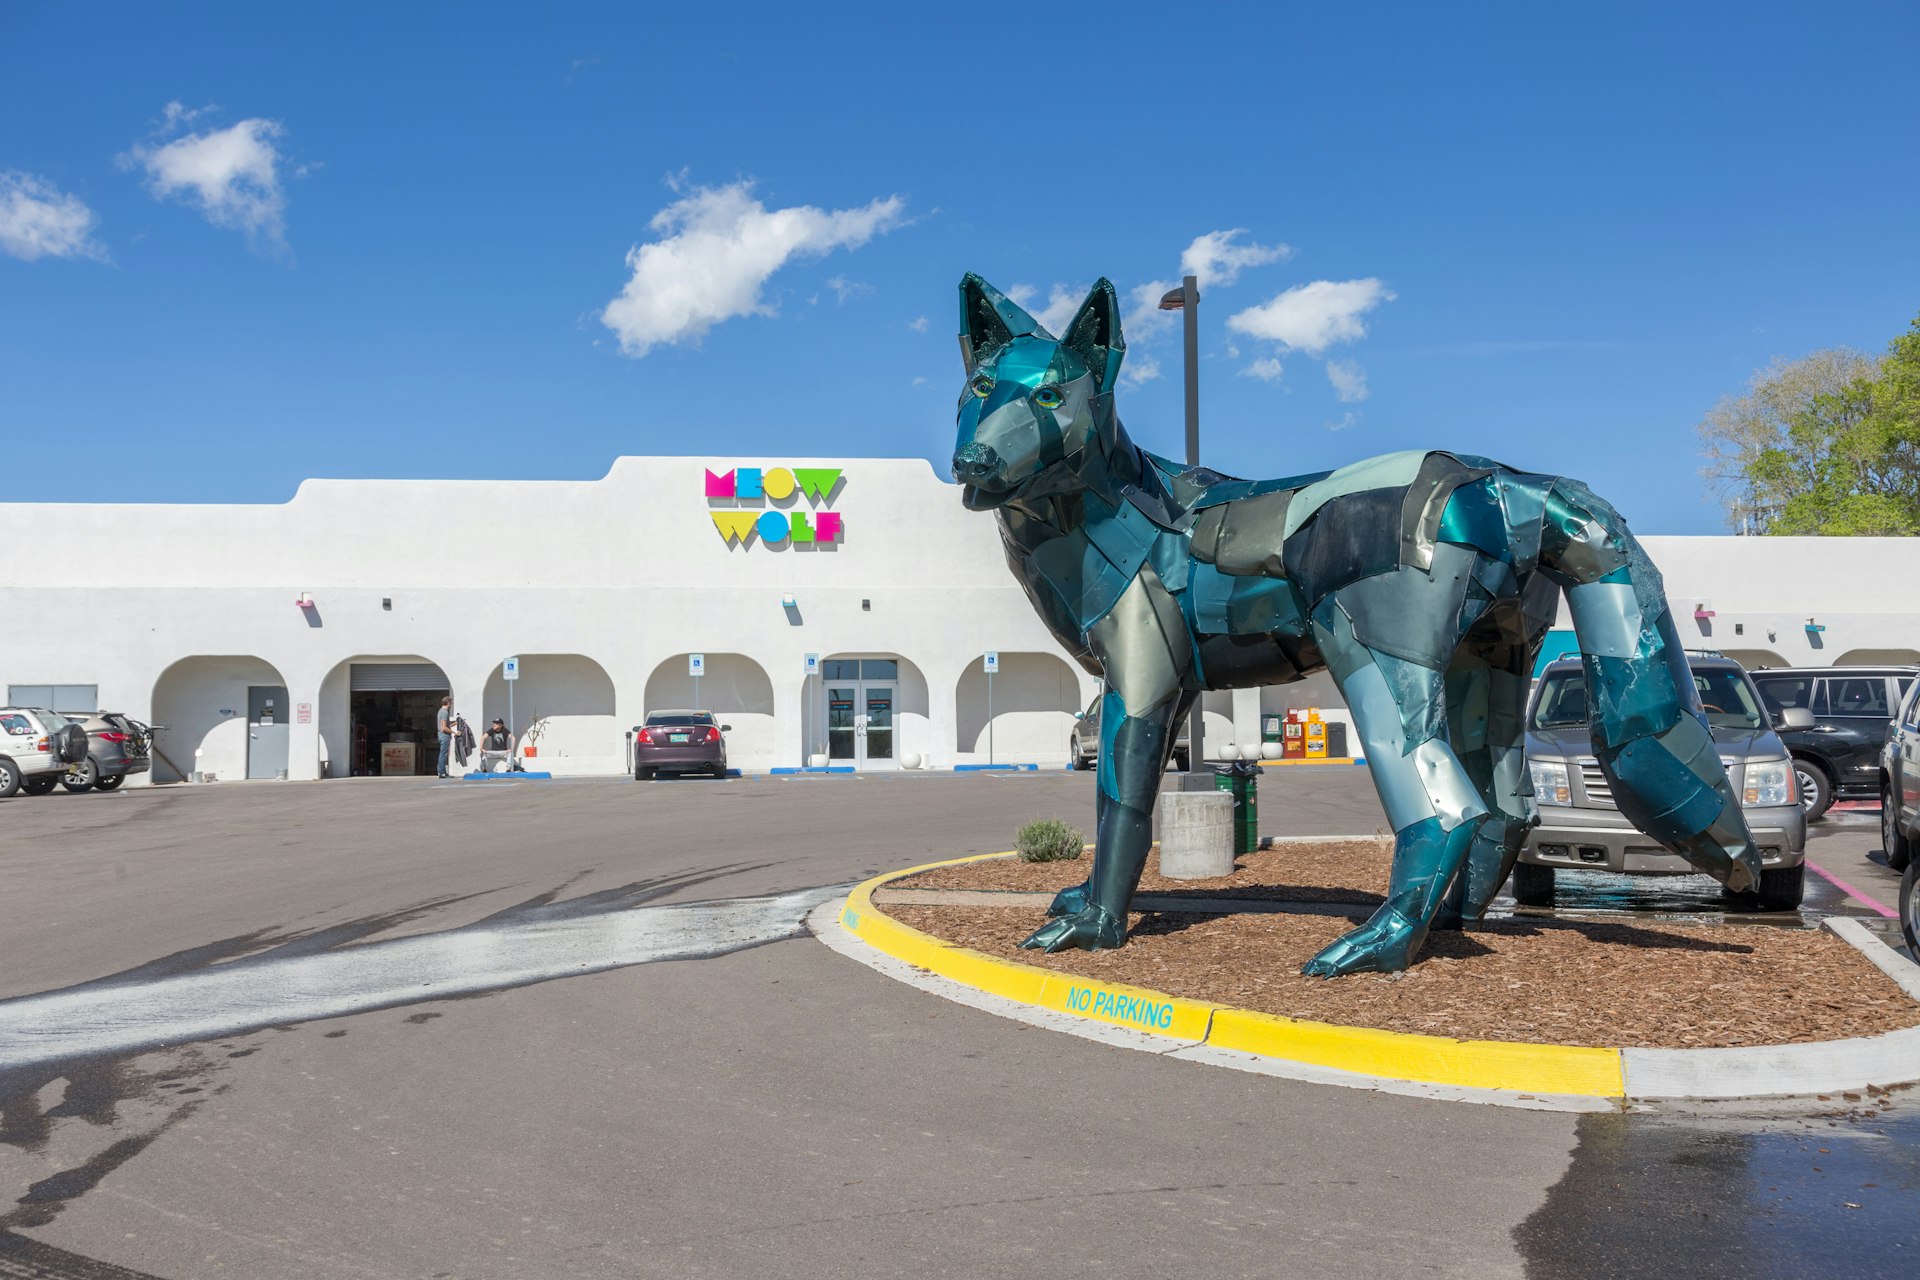 Meow Wolf interactive art gallery, as seen from the outside. The gallery is a large, white building, with a large wolf statue outside.